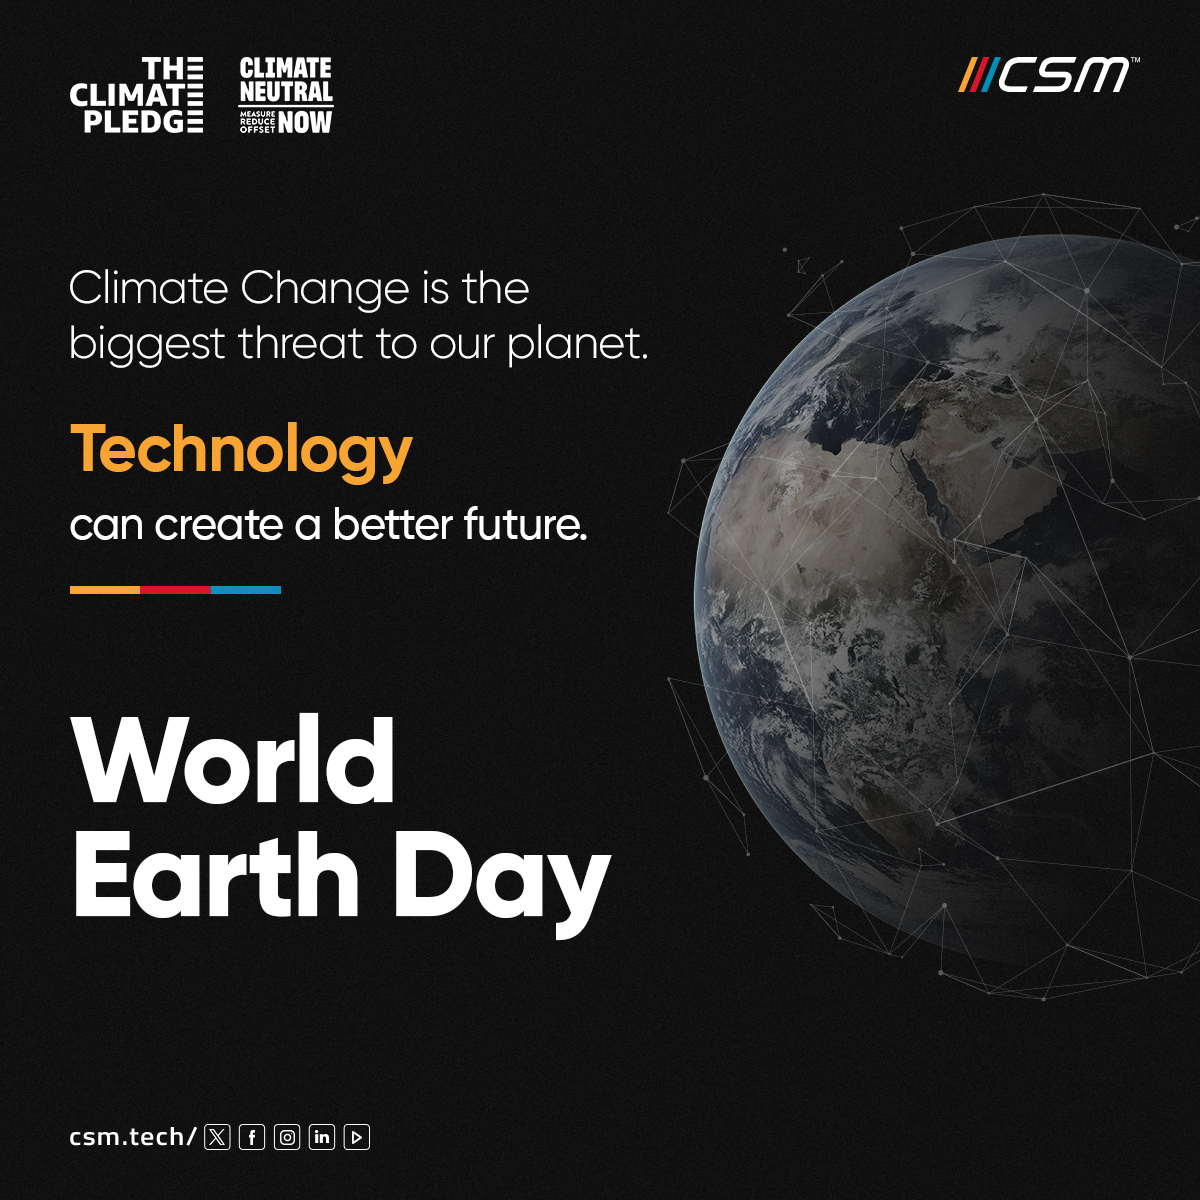 Technology can combat climate change, because every action counts in preserving our home. 🌍💚 #CSMTech #WorldEarthDay #ClimateChangeNow #UNClimateChangeNow #TheClimatePledge